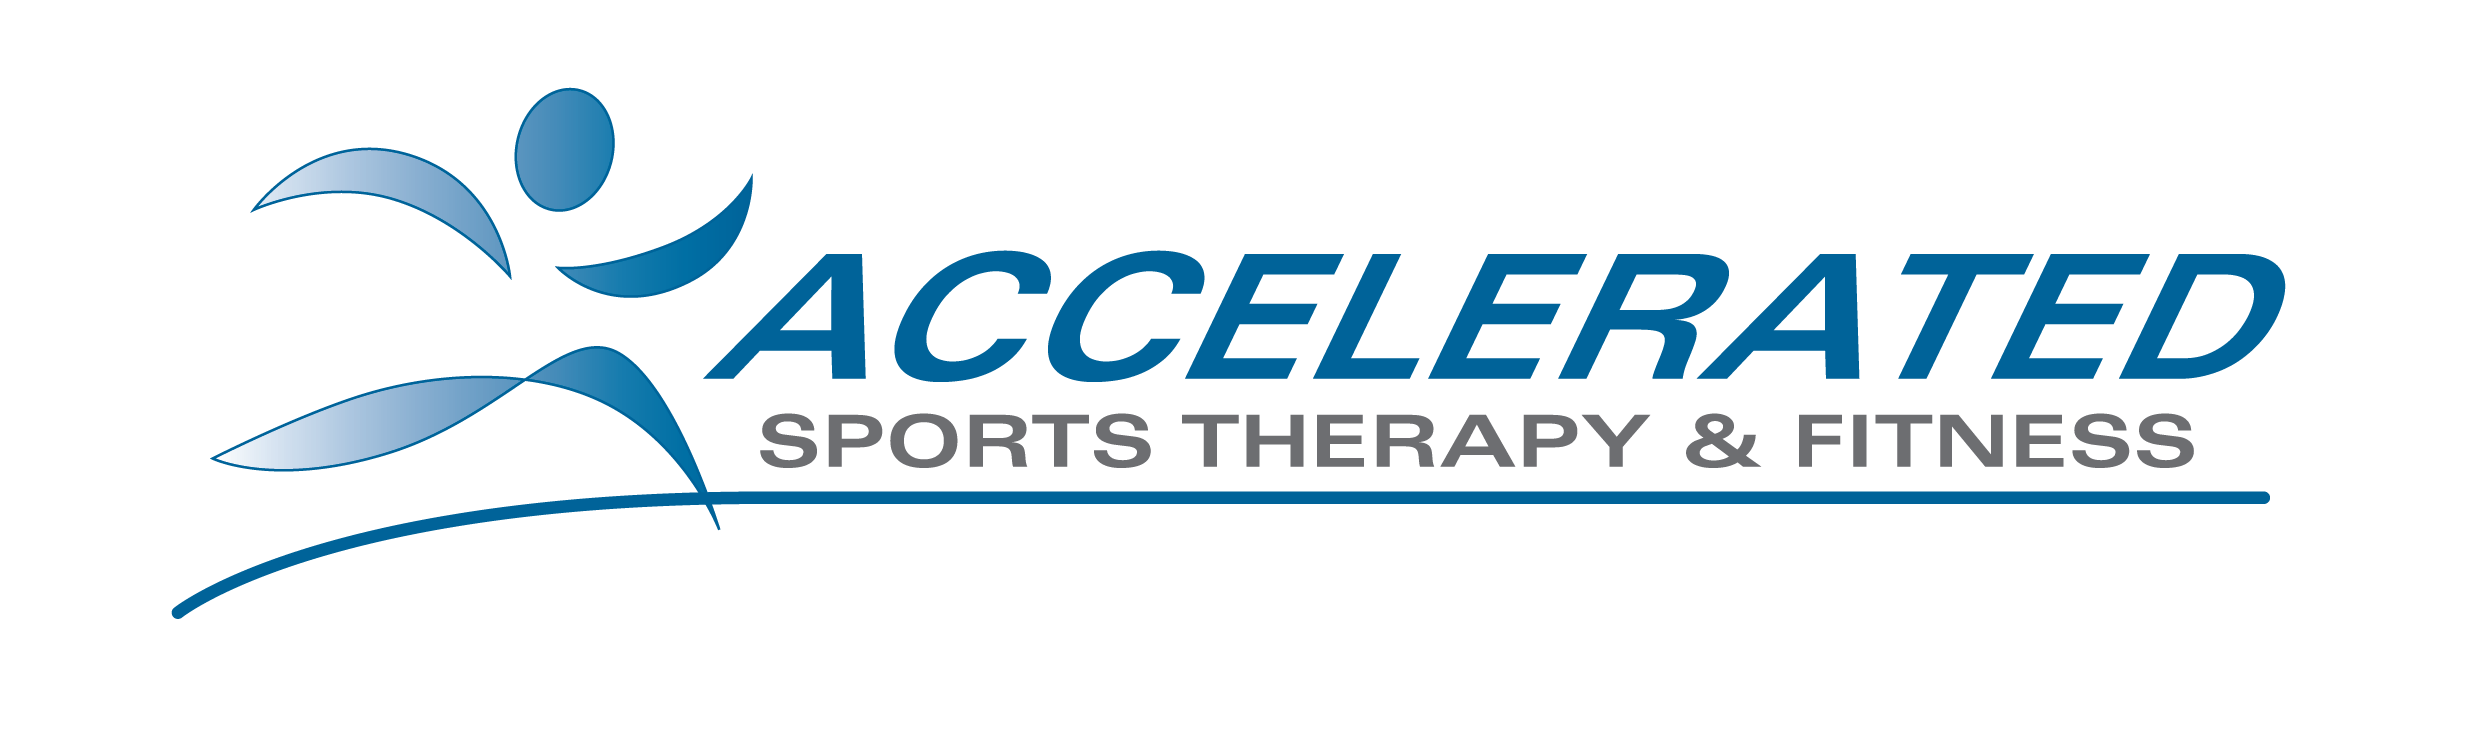 Accelerated Sports Therapy